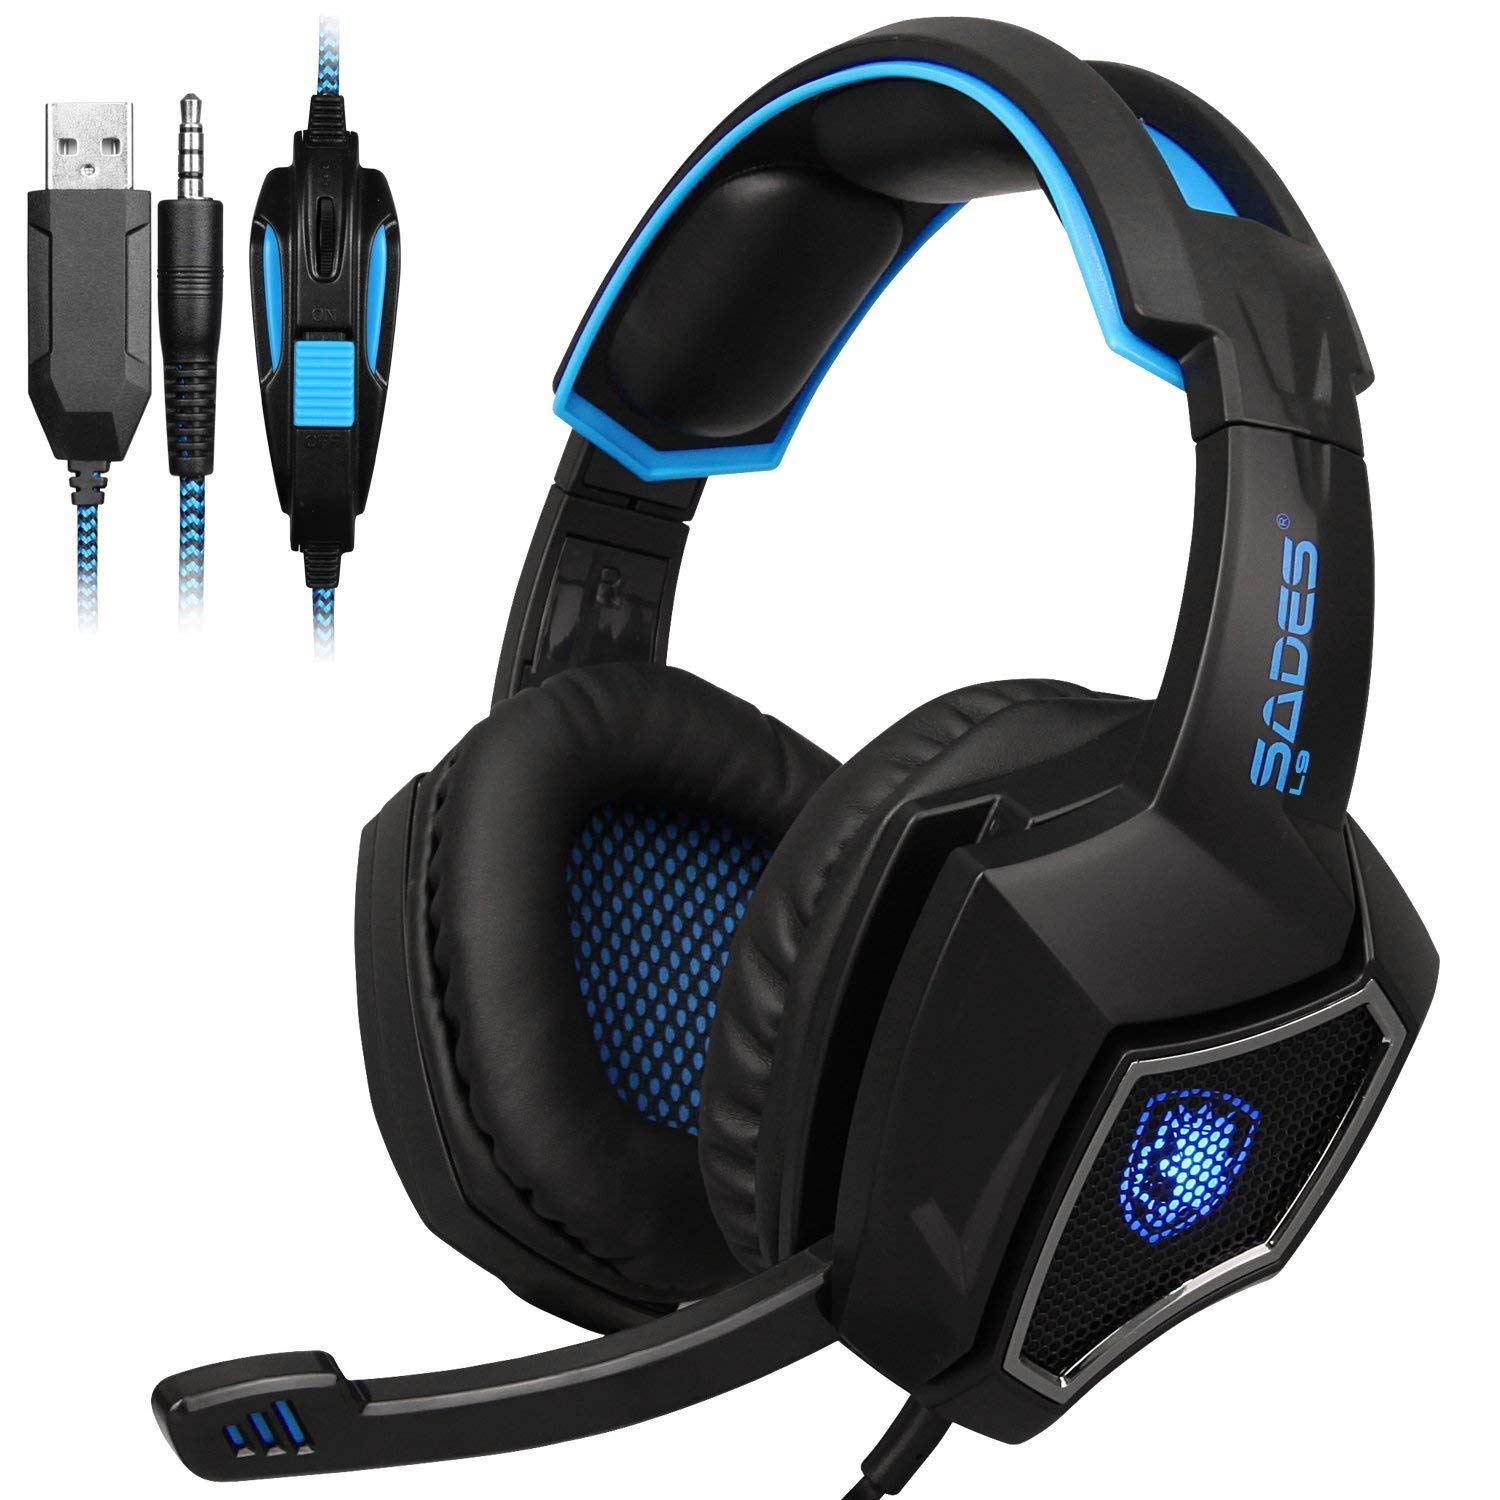 Sades L9 Gaming Headset: How To Find When Connected